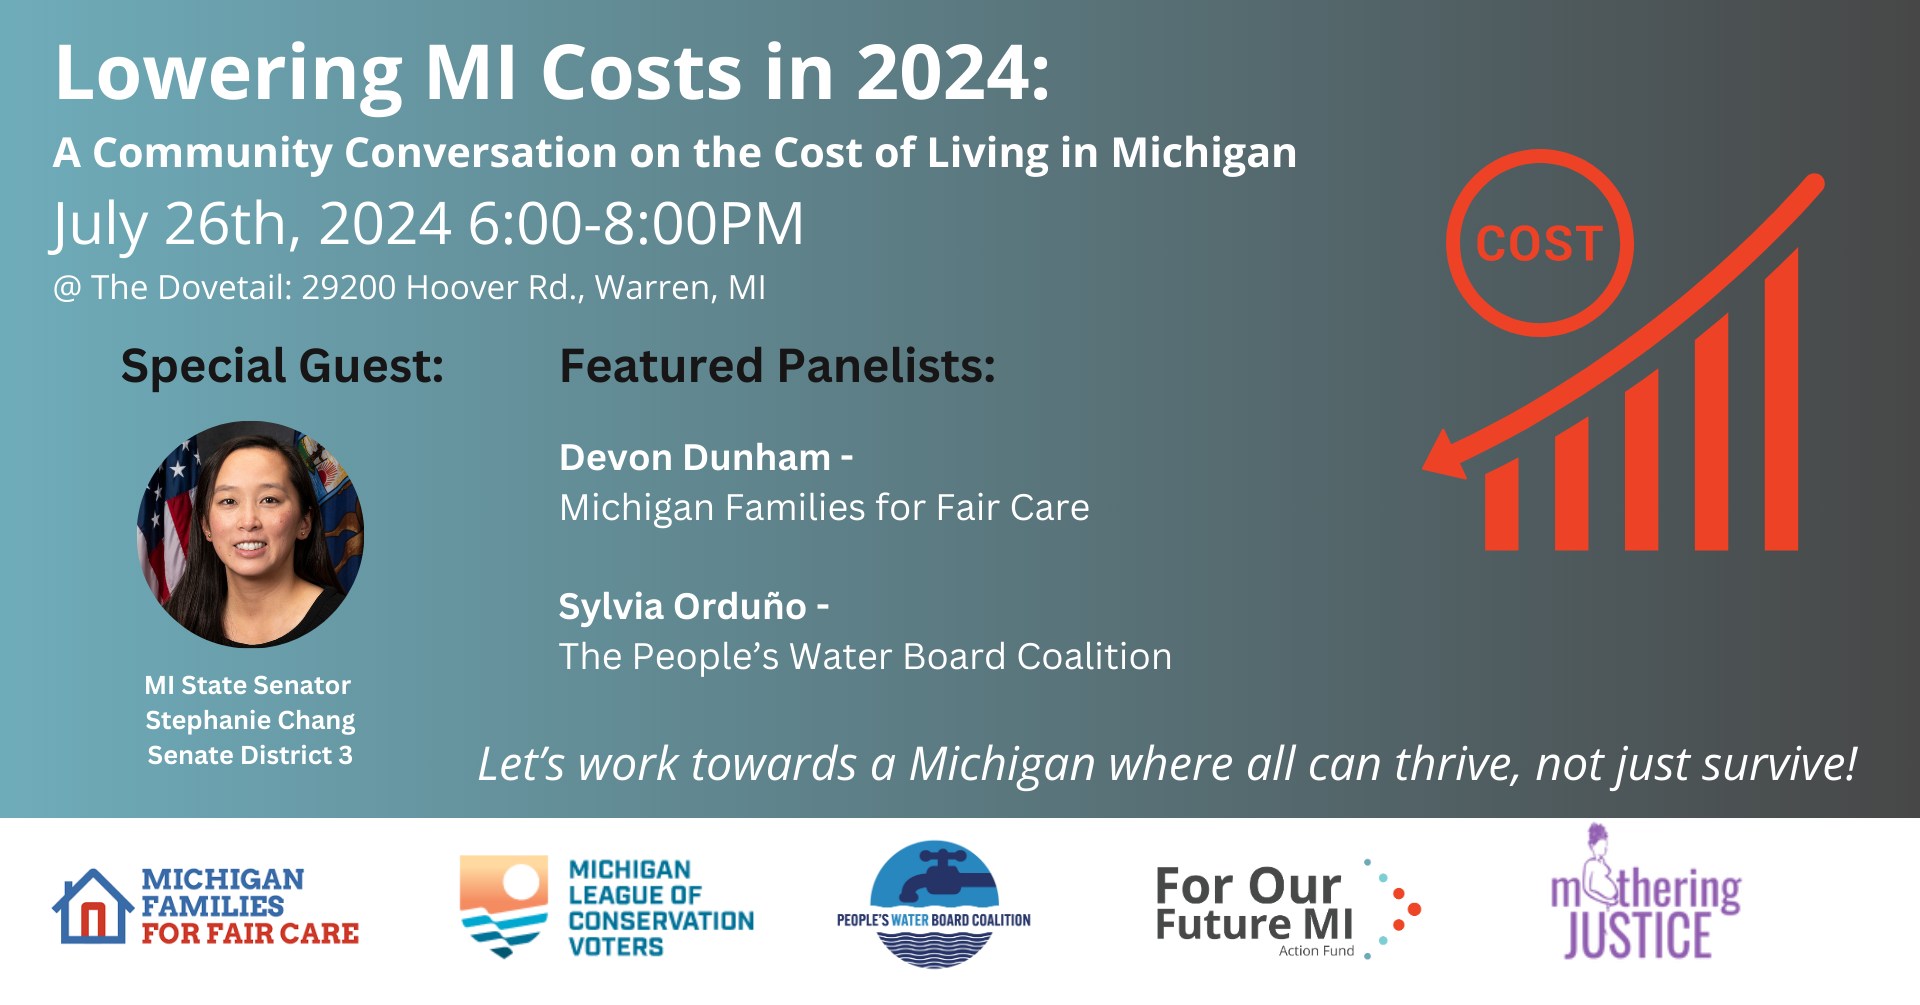 Lowering MI Costs in 2024: A Community Conversation on the Cost of Living in MI